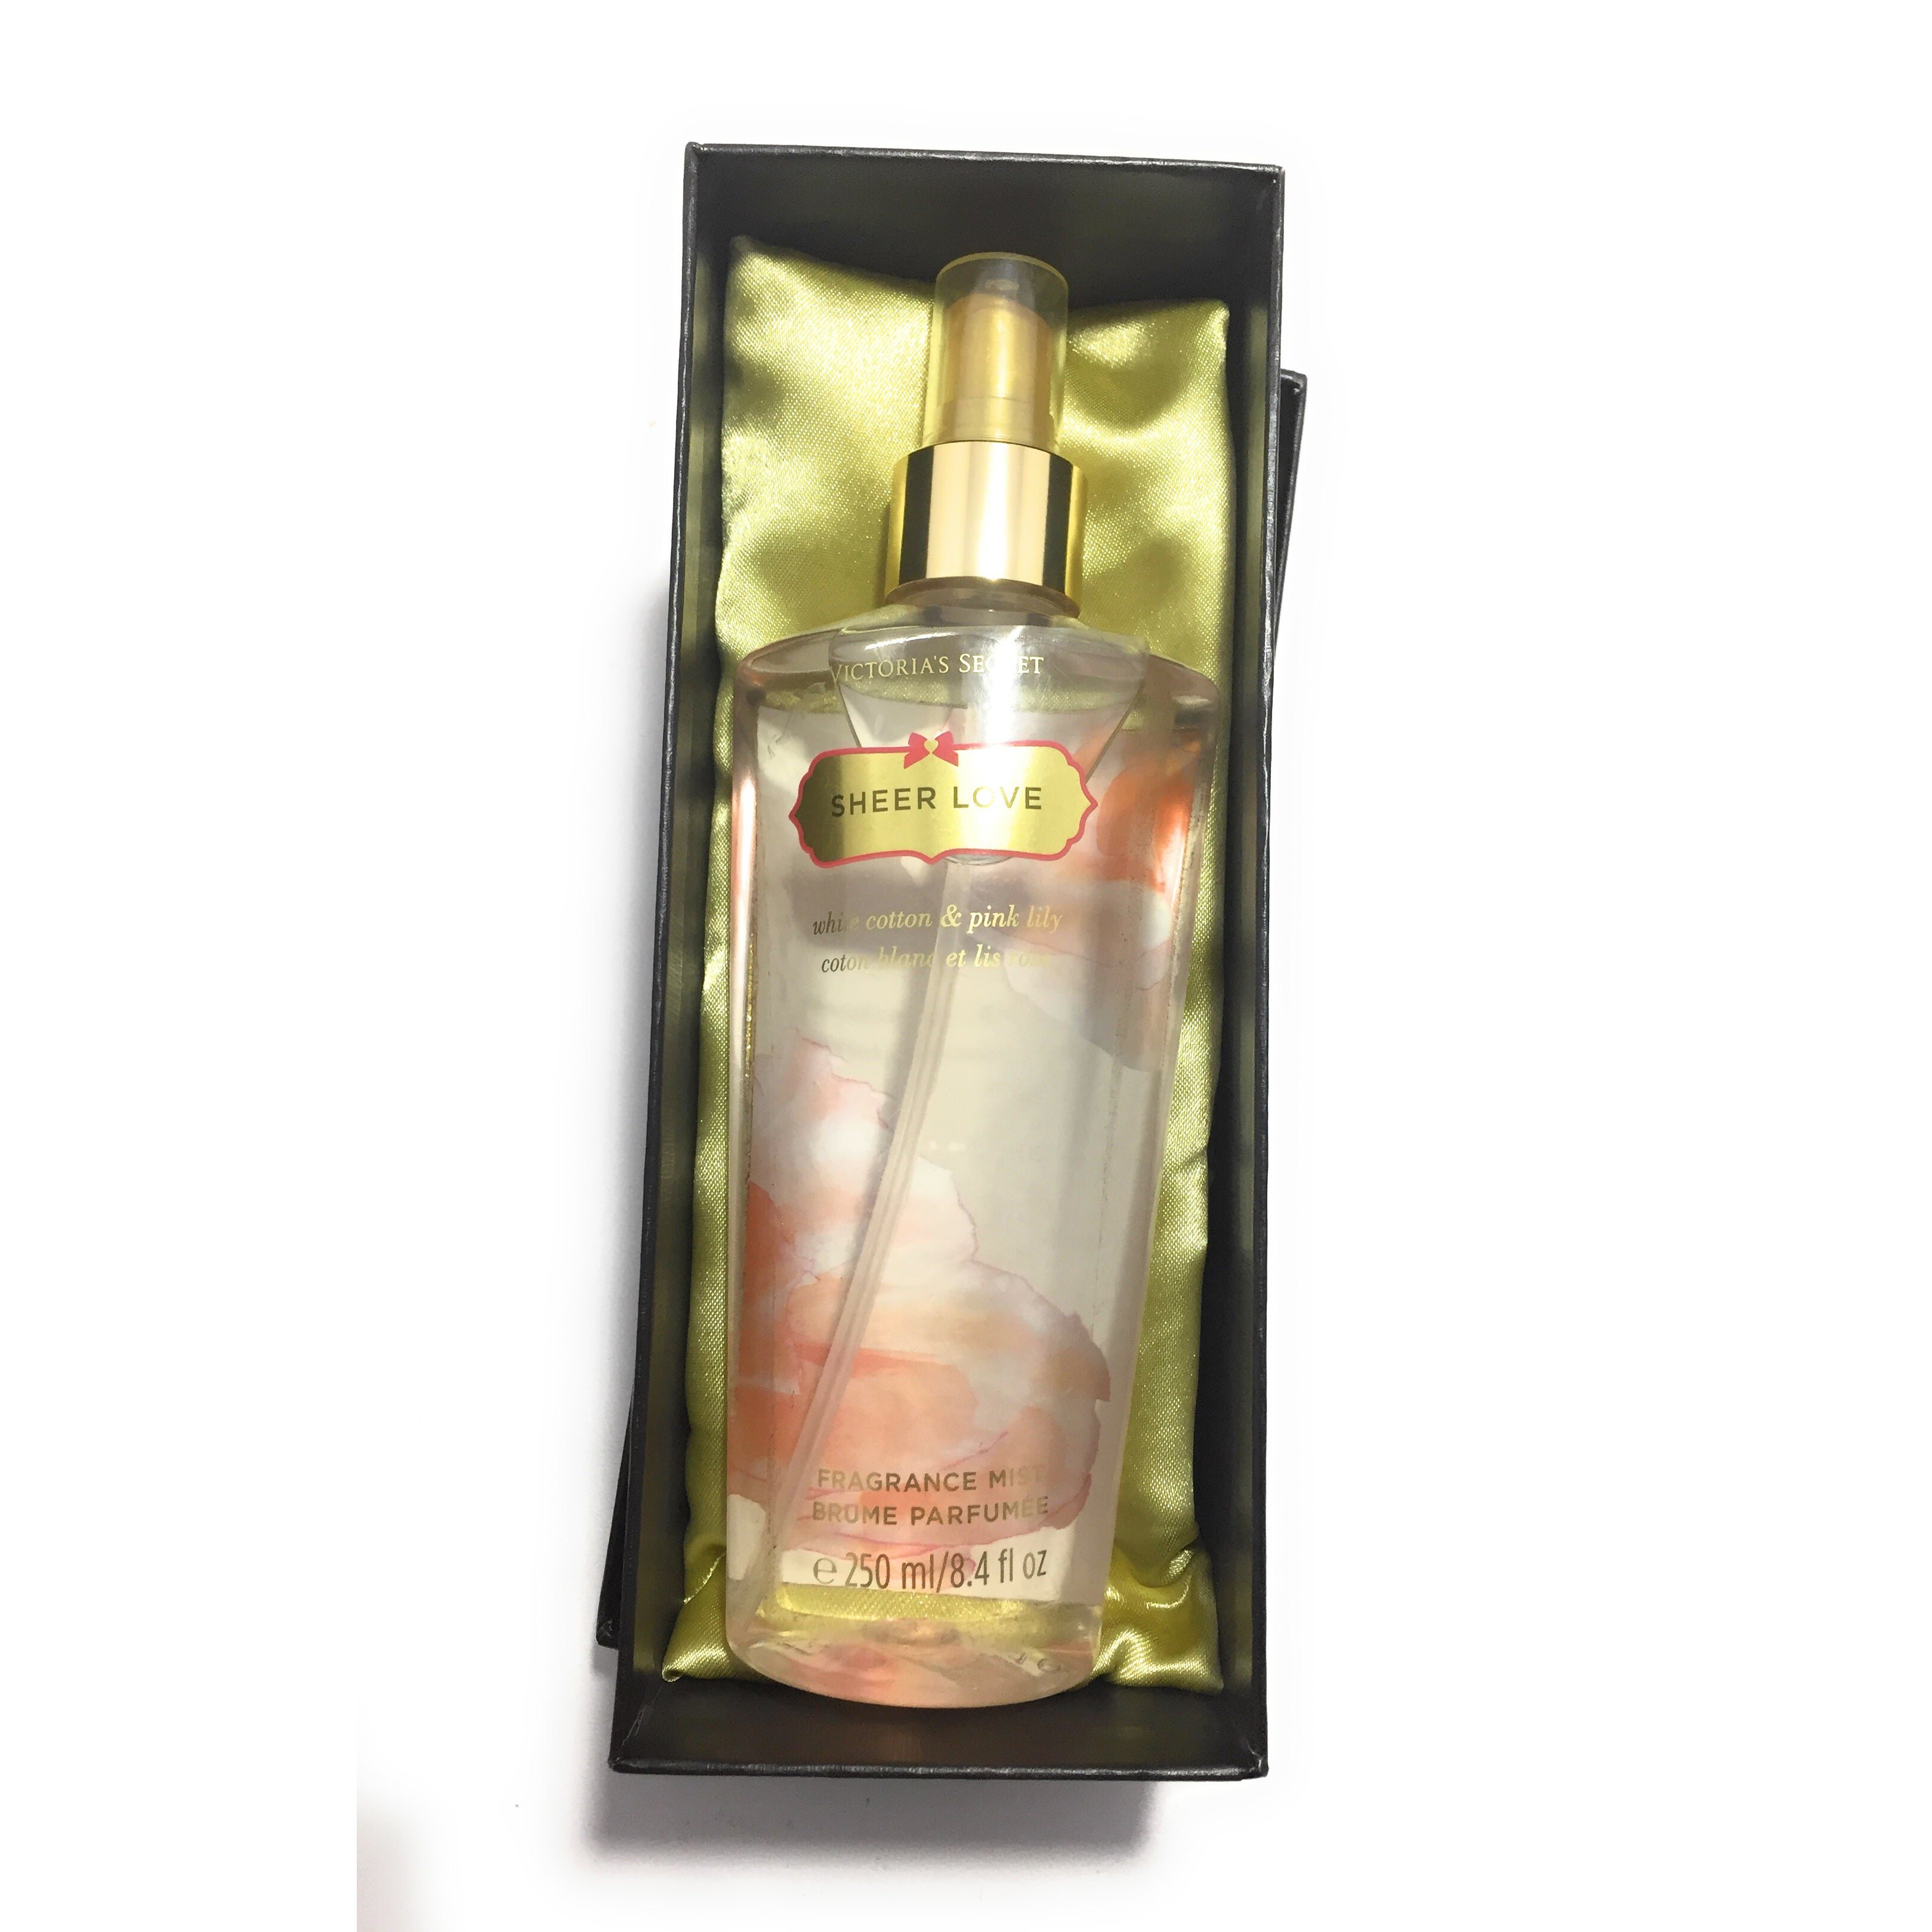 victoria secret sheer love white cotton and pink lily